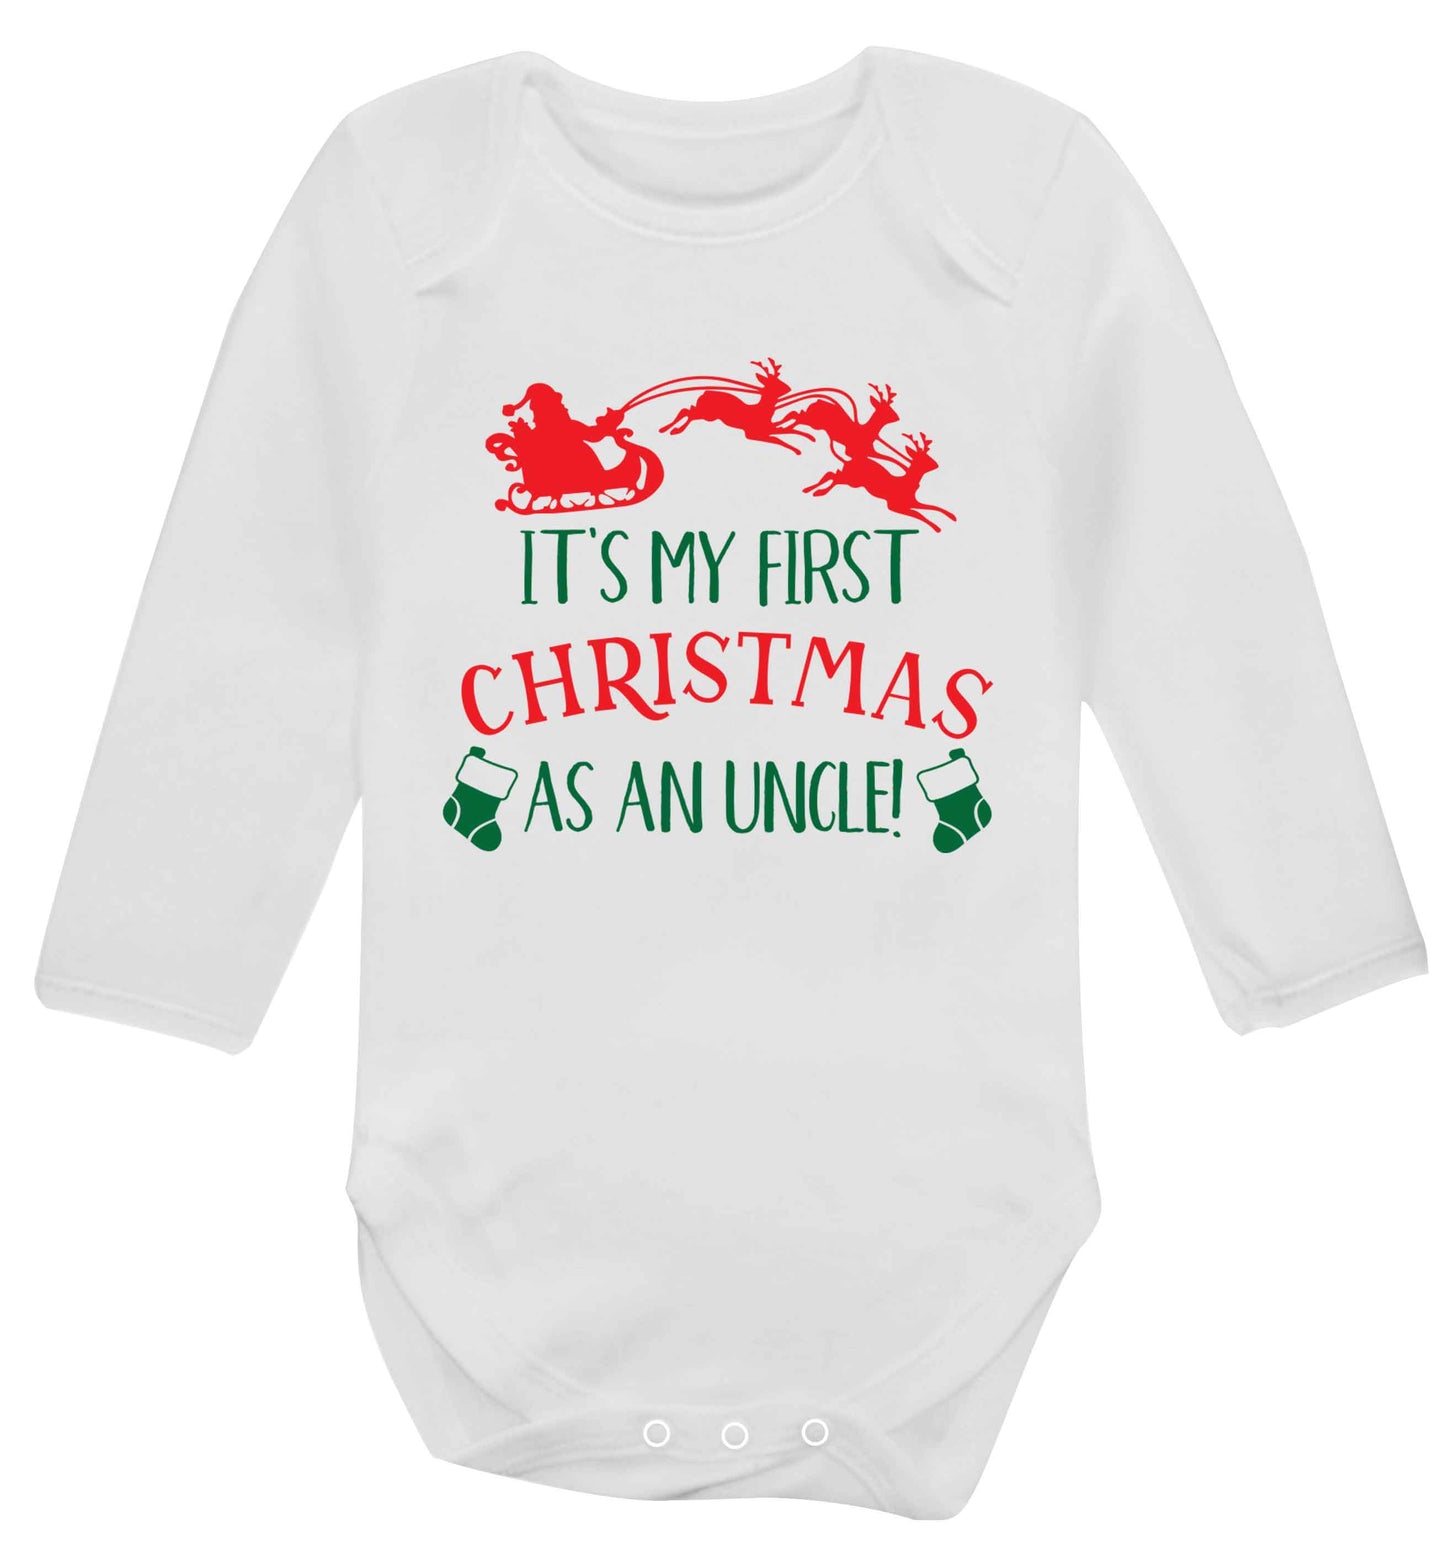 It's my first Christmas as an uncle! Baby Vest long sleeved white 6-12 months